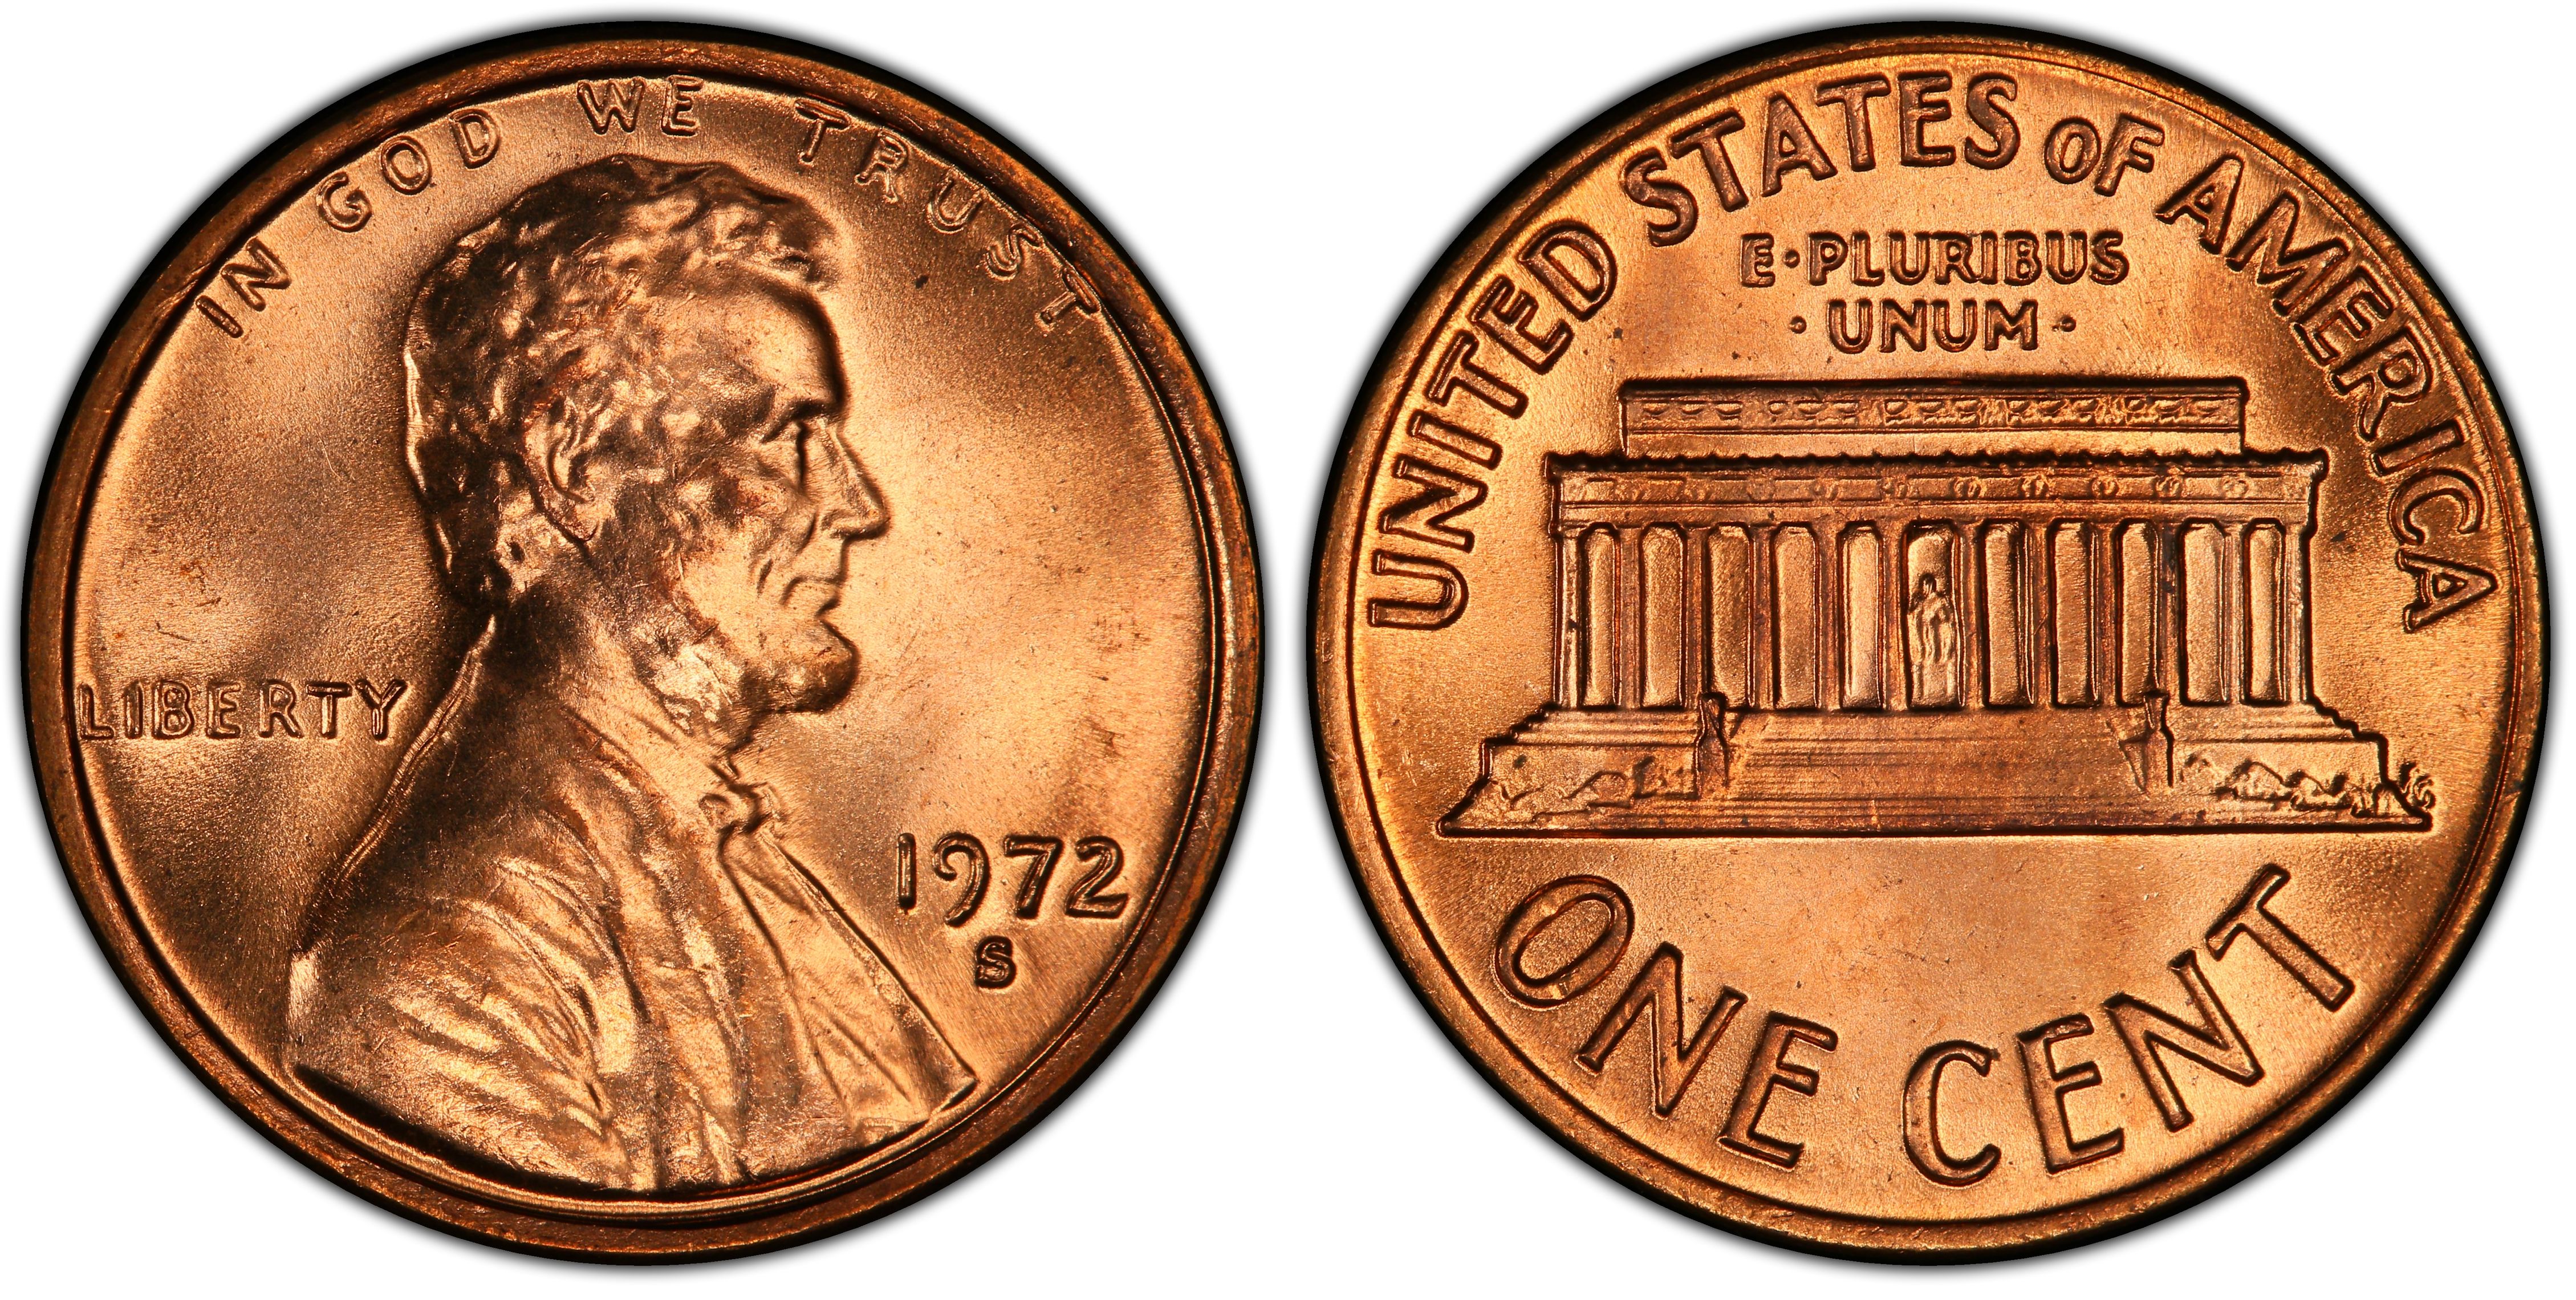 BU Uncirculated Details about   1972 Lincoln Memorial Cent  D 